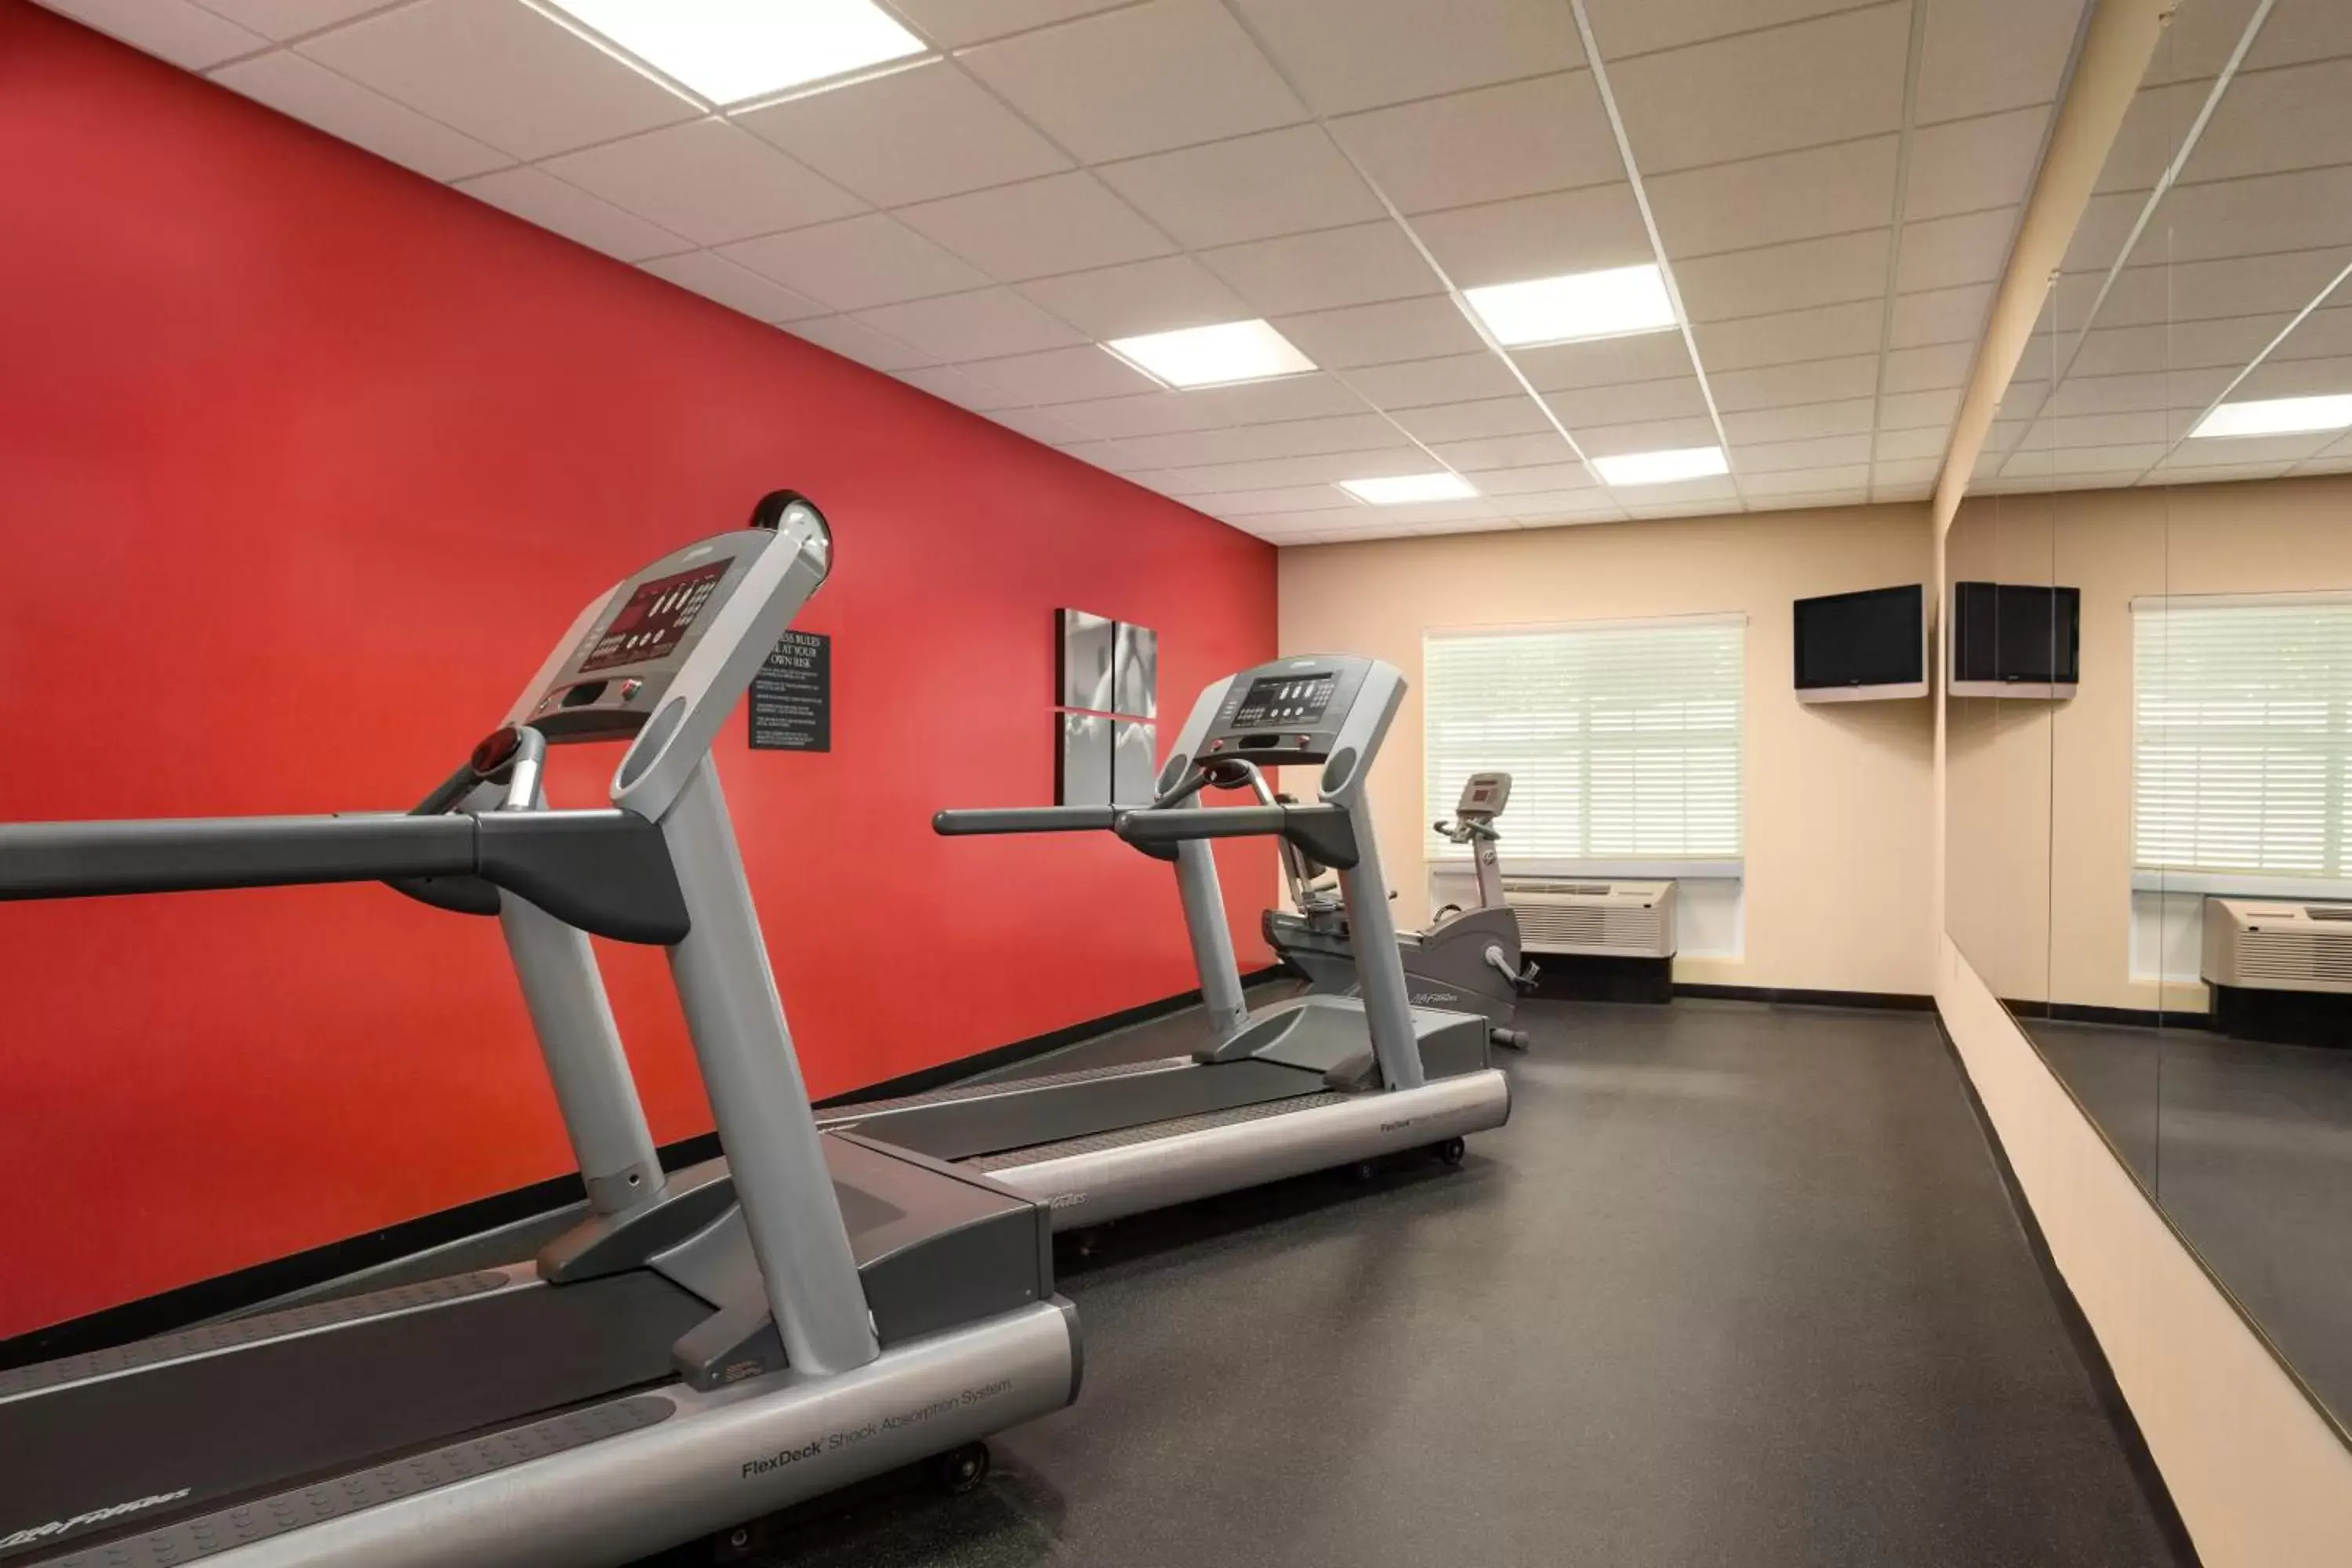 Fitness centre/facilities, Fitness Center/Facilities in Country Inn & Suites by Radisson, Goodlettsville, TN